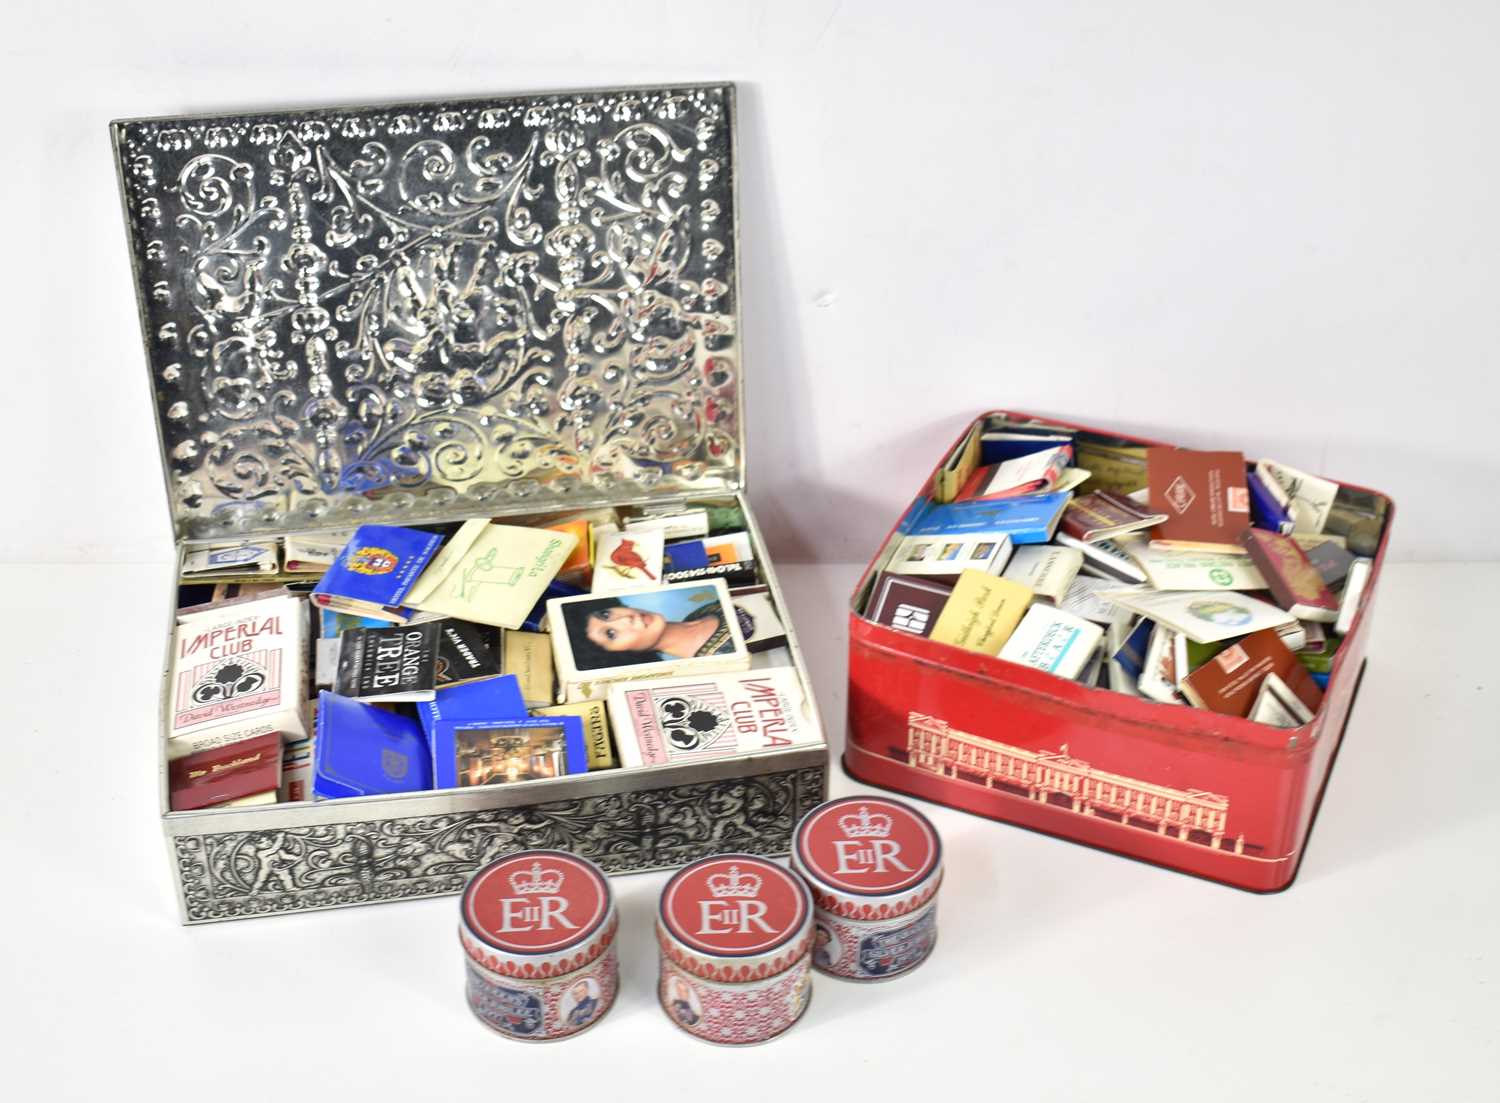 A large collection of matchbooks, matches and sewing sets, mostly still full and unused,